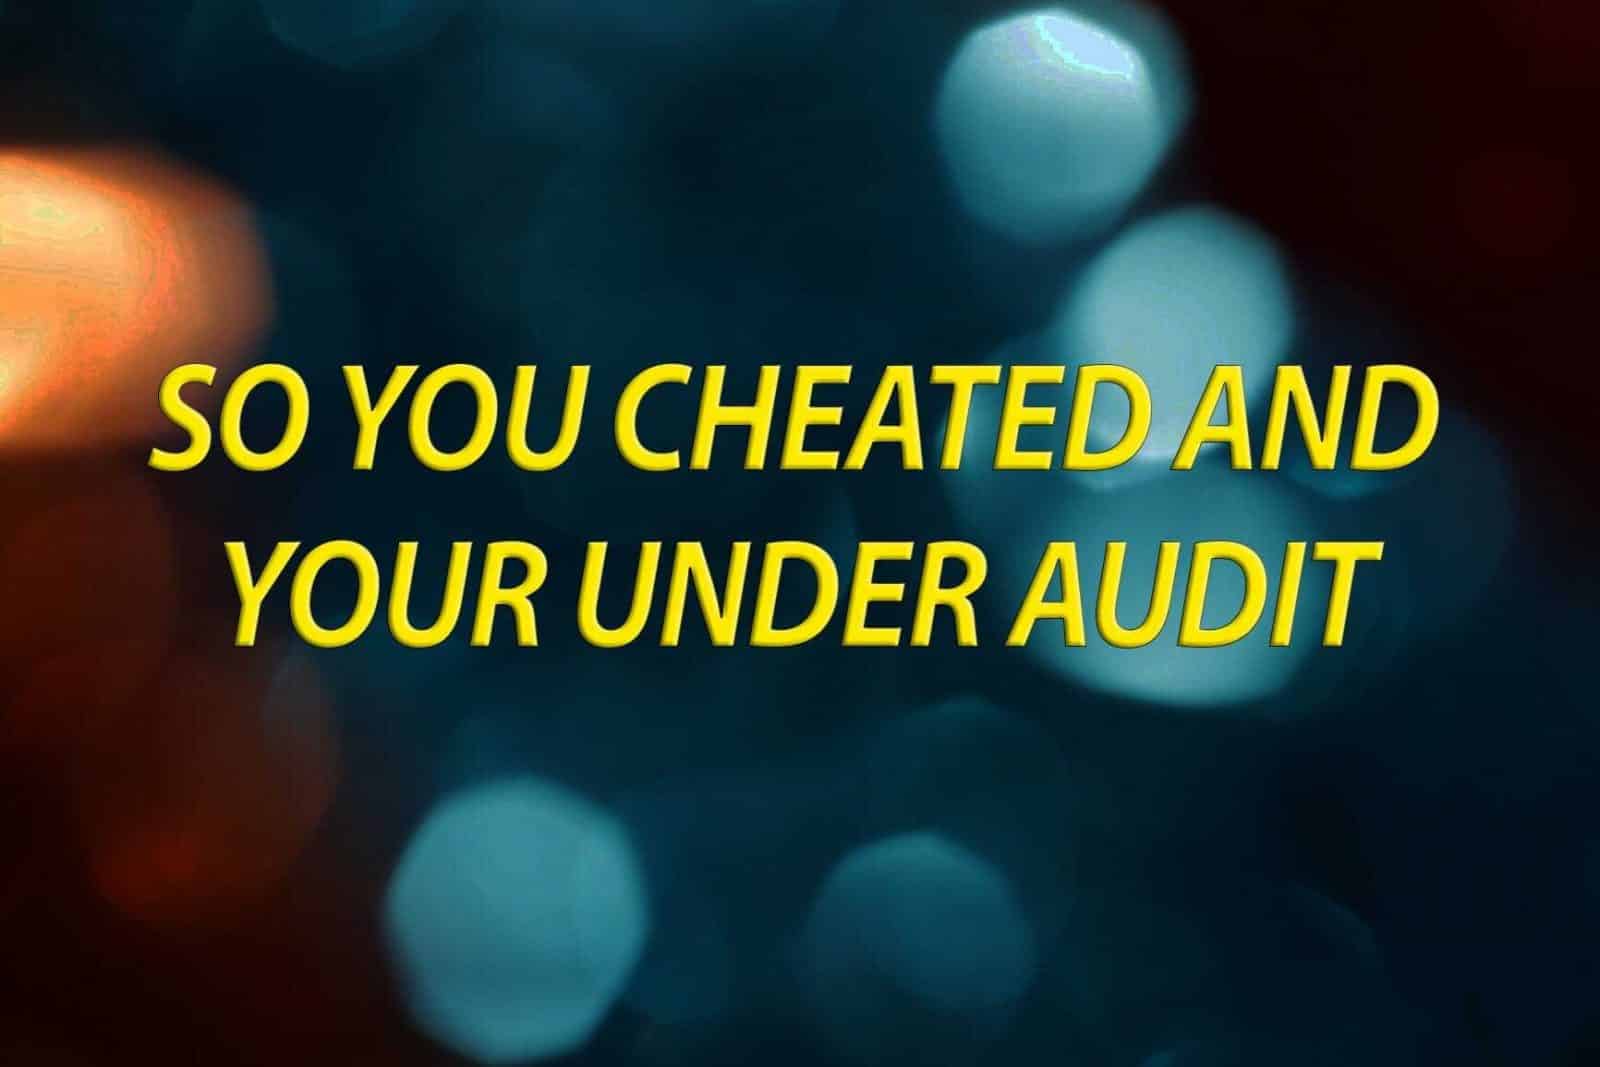 So you cheated on your taxes and you are under a tax audit